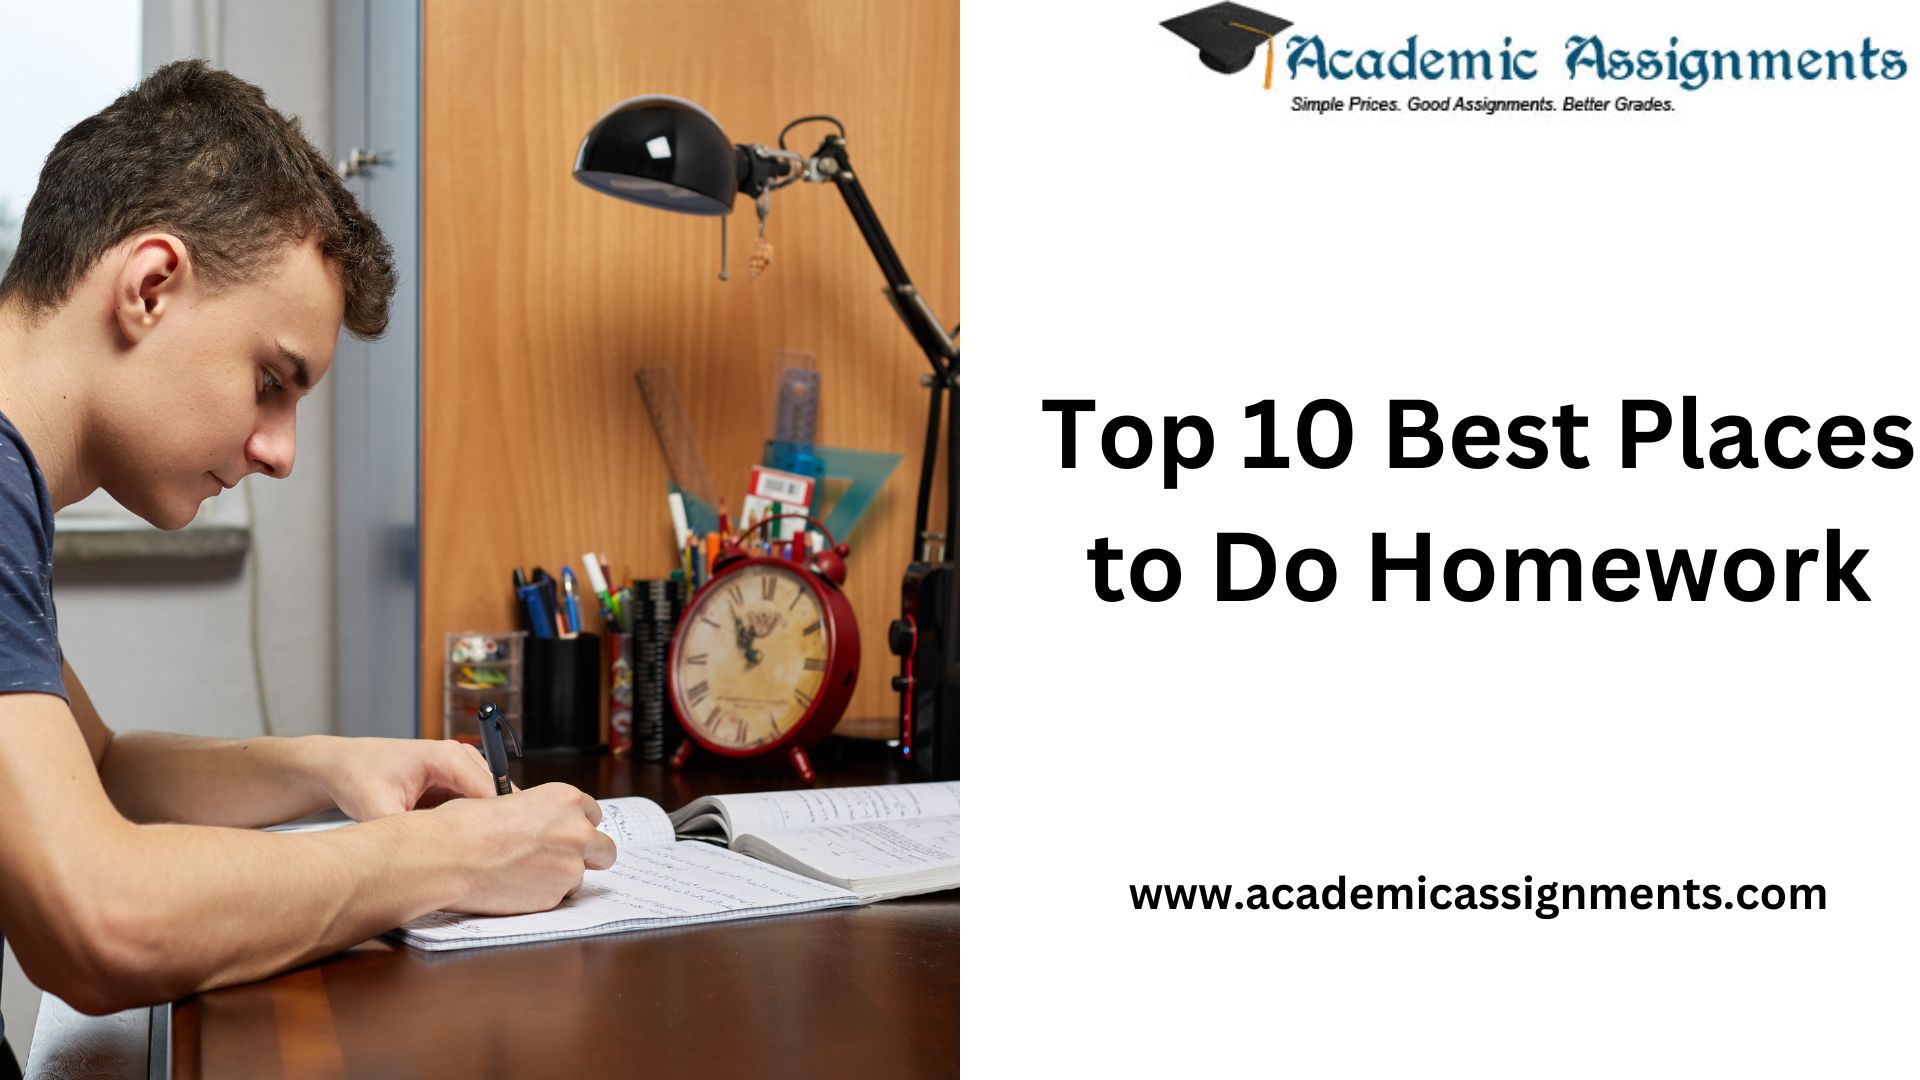 Top 10 Best Places to Do Homework